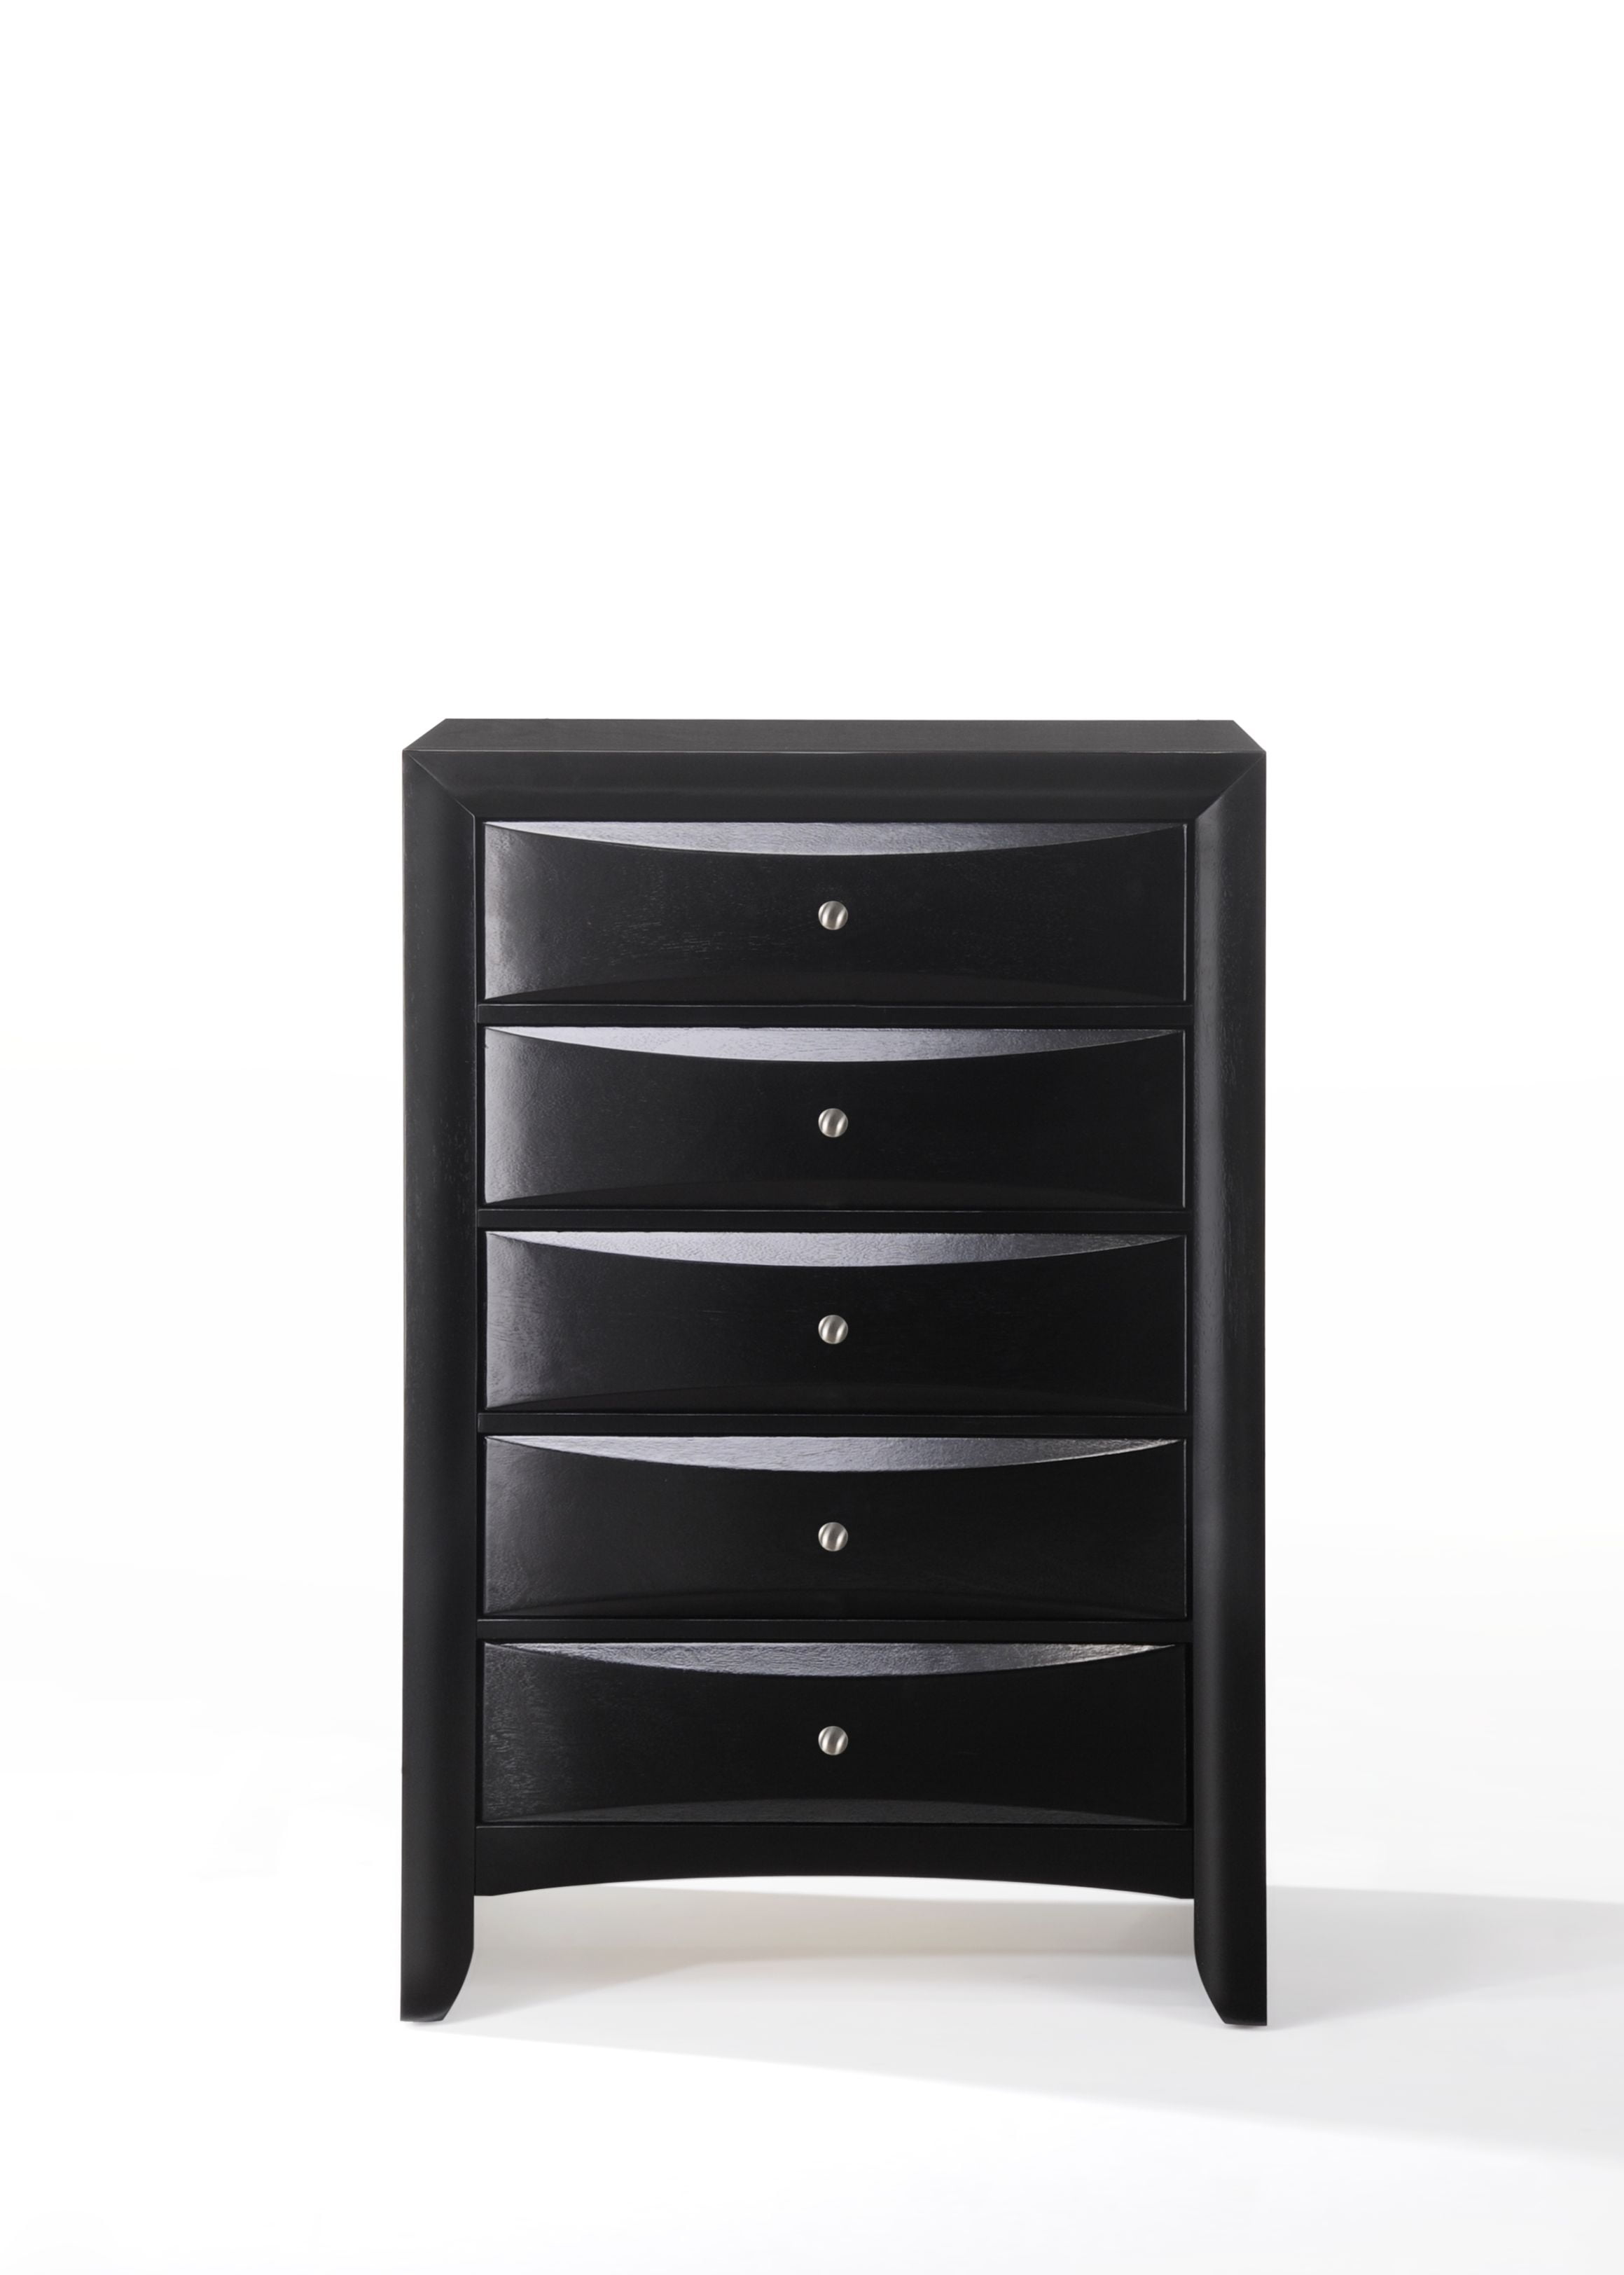 Acme Furniture Black Finish Chest With Five Drawers Walmart Com